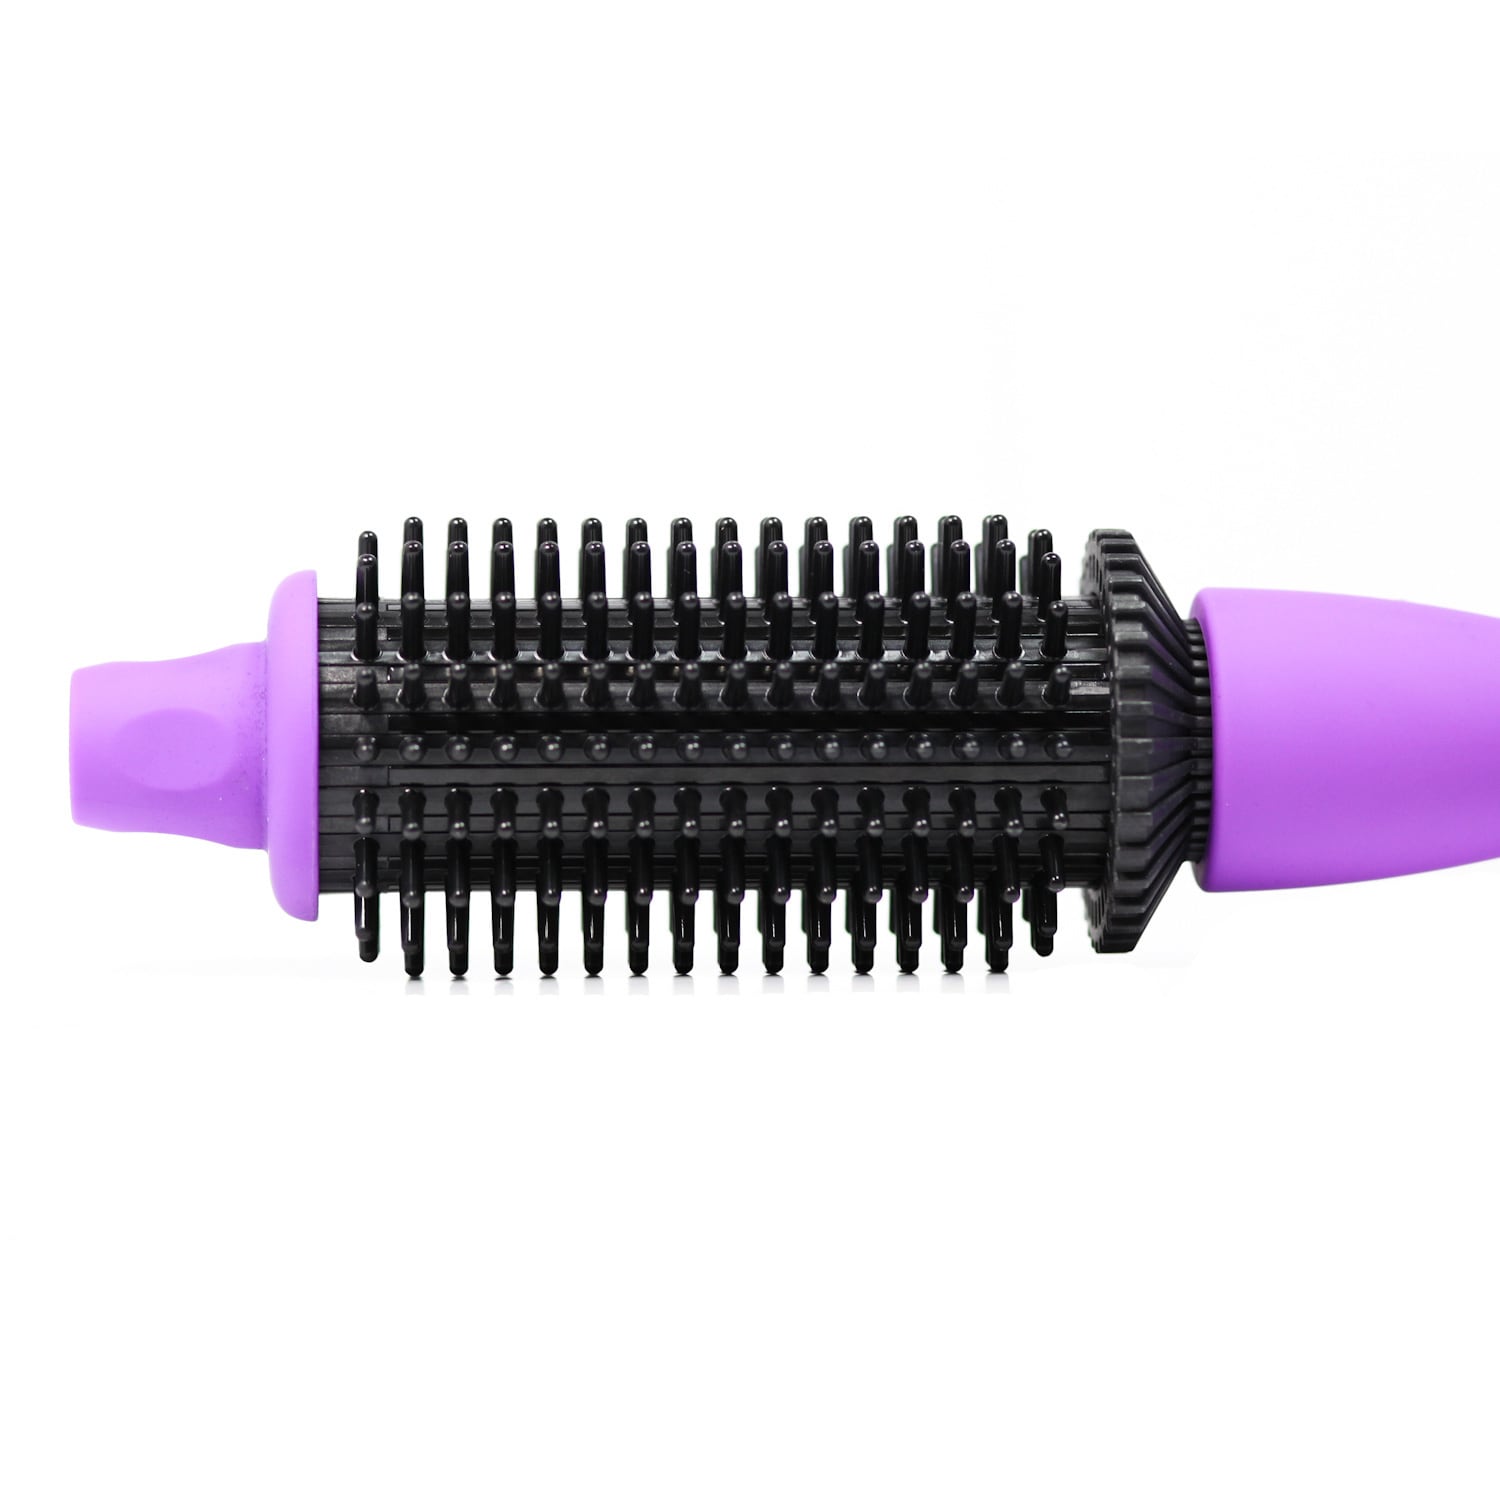 Calista Perfecter Pro Plus Heated Round Brush, Professional Styling Brush,  Burn-Free Firm Bristles, Ionic and Ceramic Technology (1.0, Rhododendron)